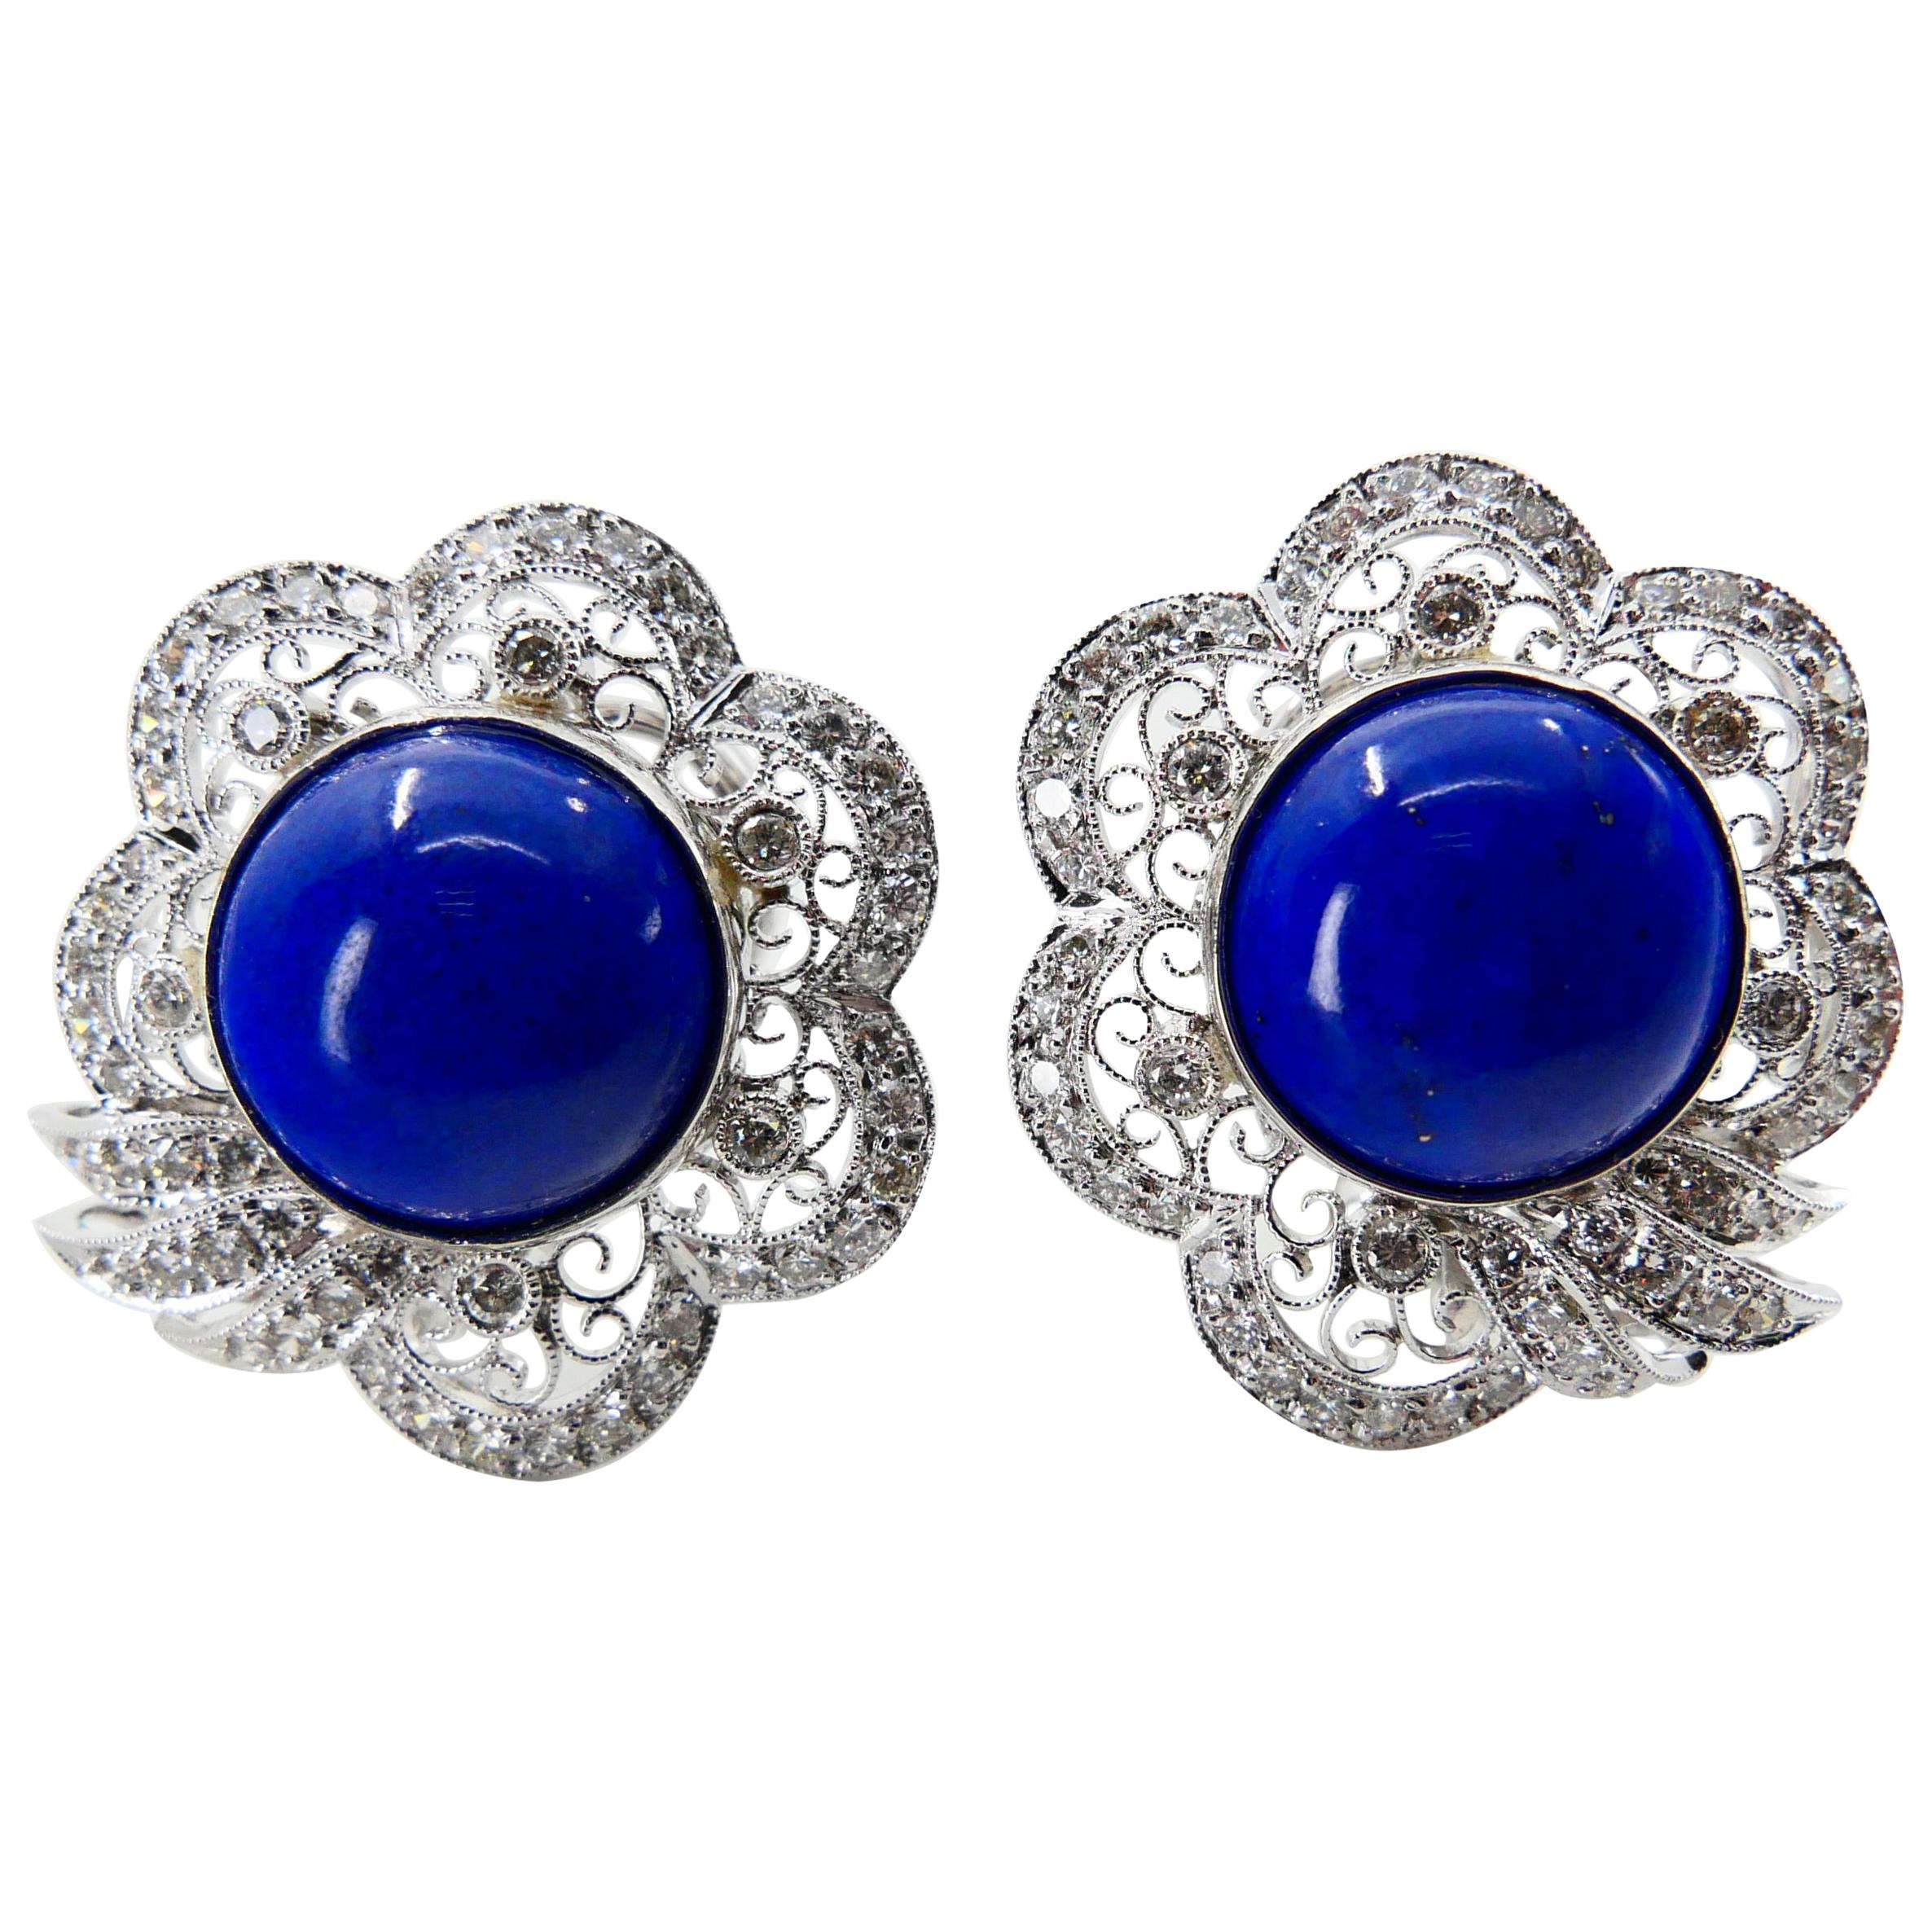 Royal Blue Lapis Lazuli And Diamond Earrings With Natural Gold Veins & Spots For Sale